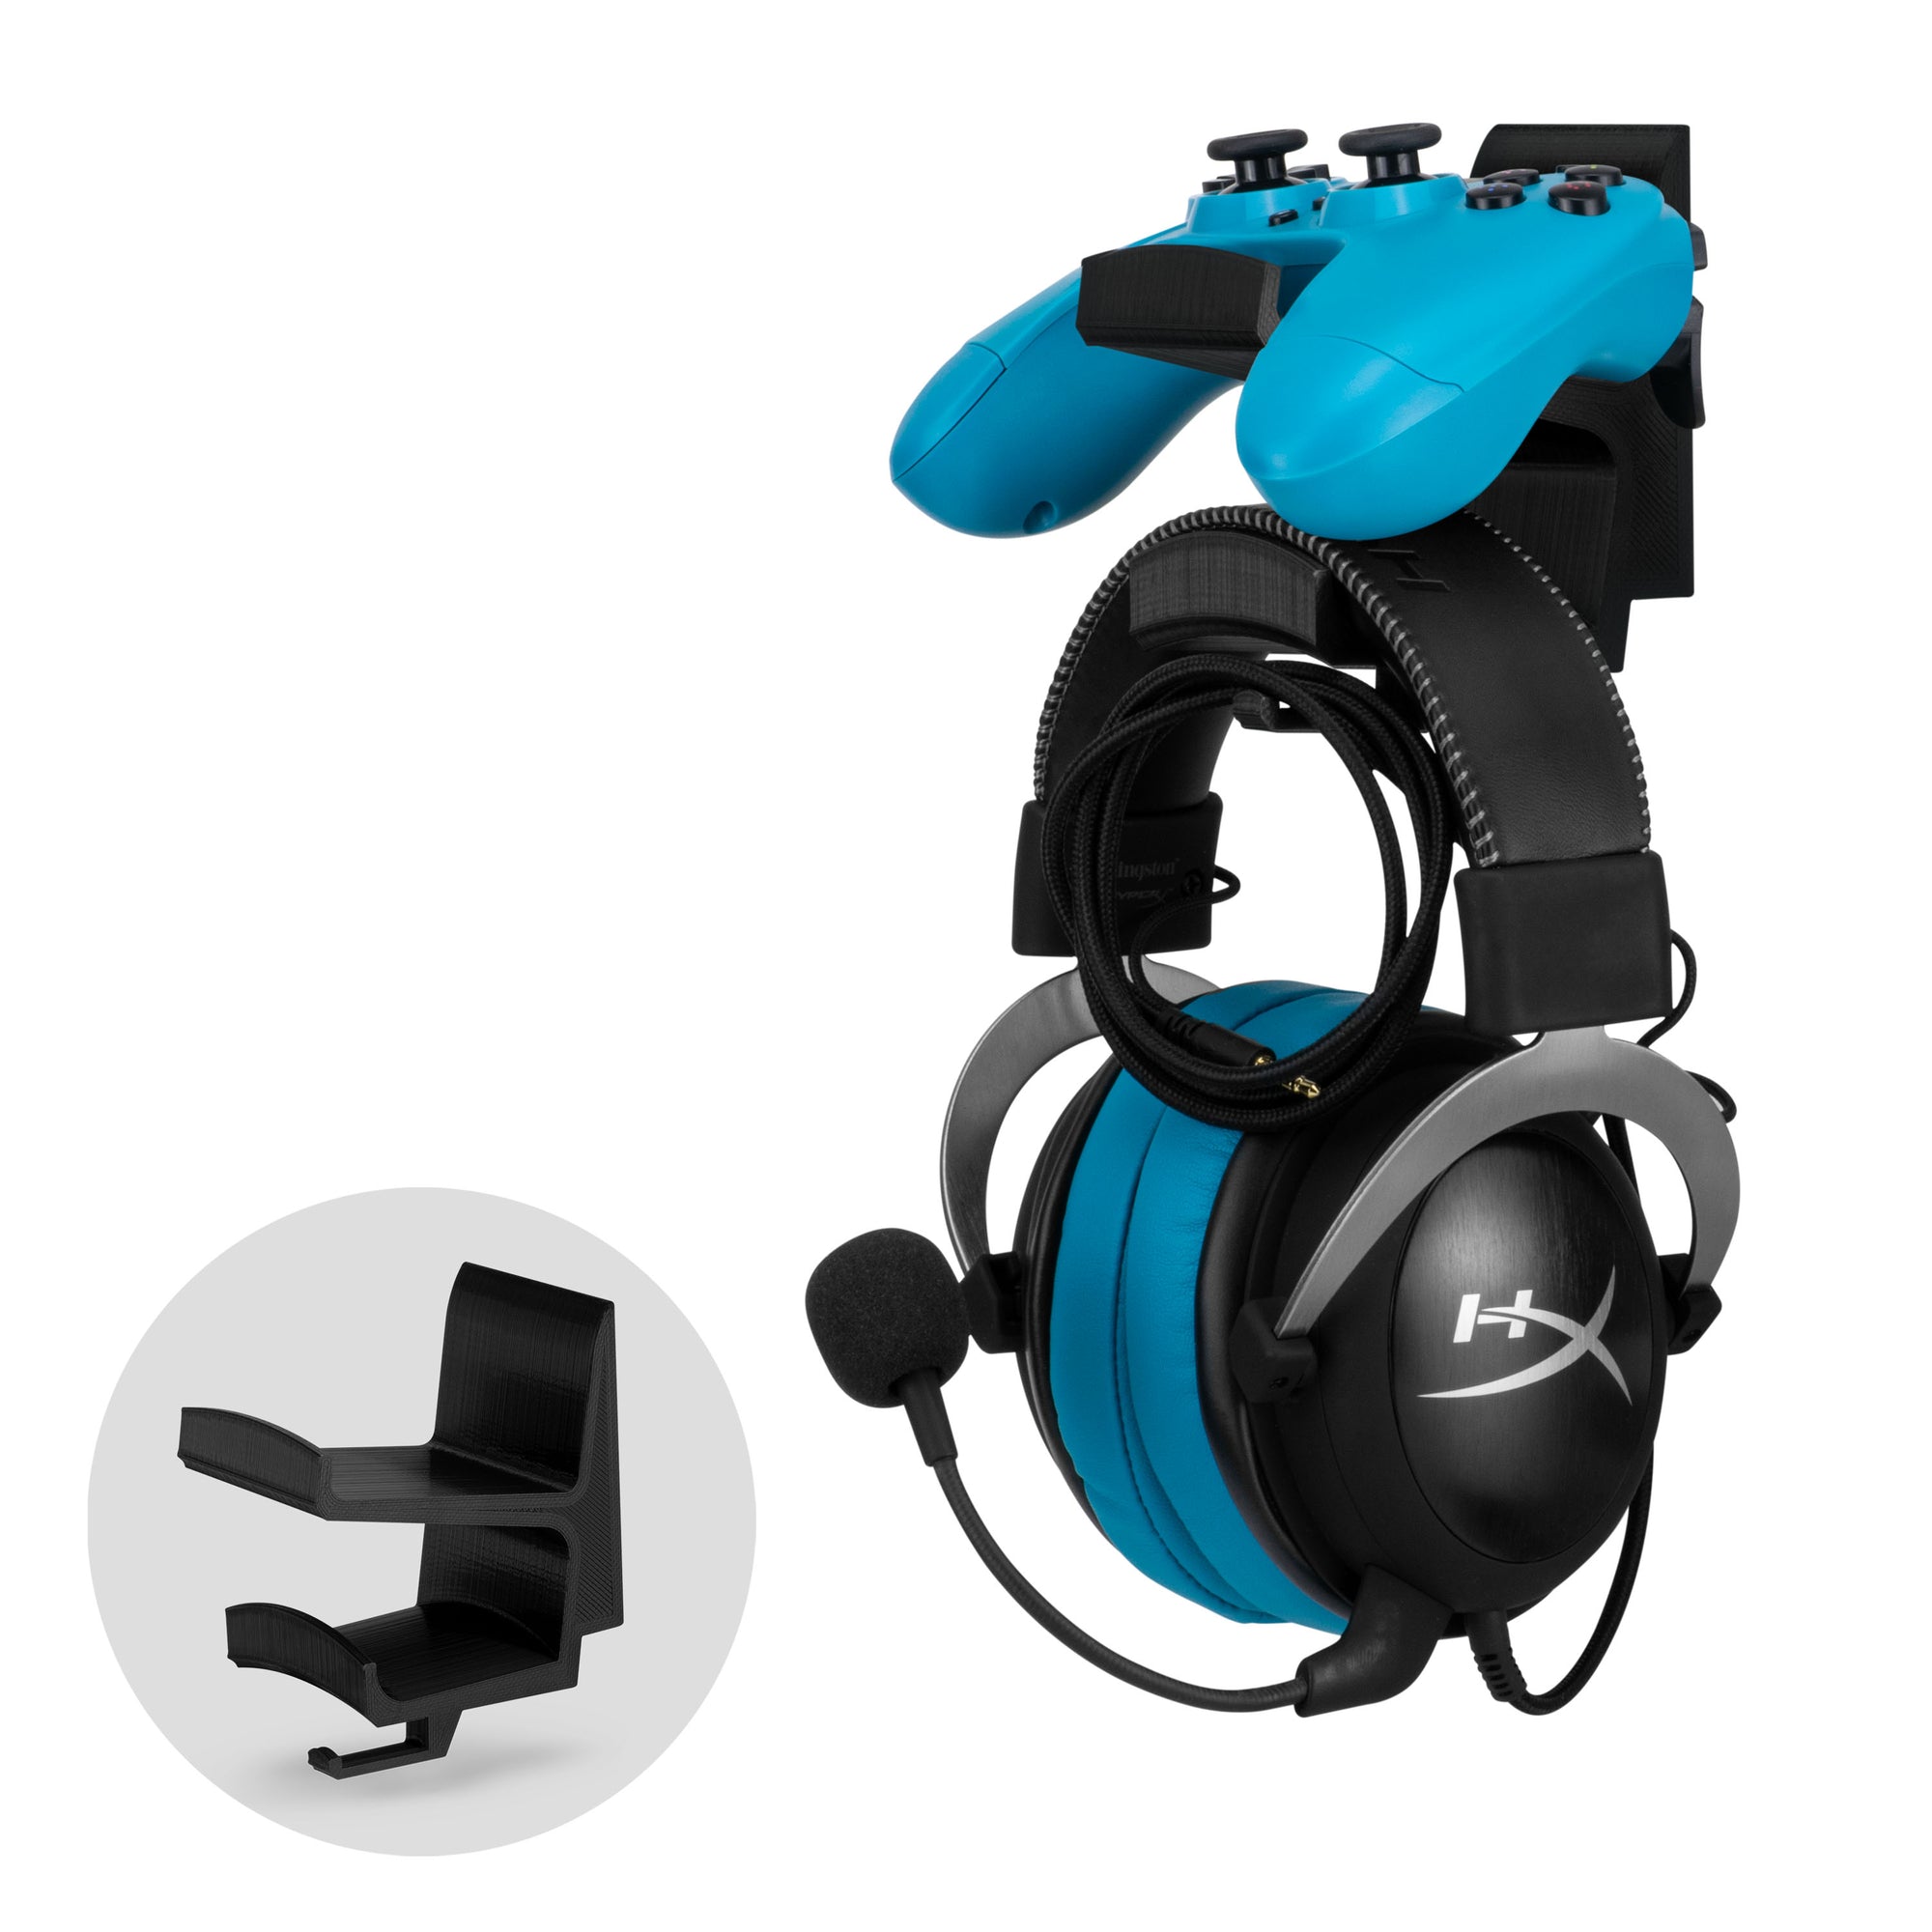 The Storio - Game Controller & Headphone Wall Hanger - Universal Adhesive Mount, No Screws or Mess